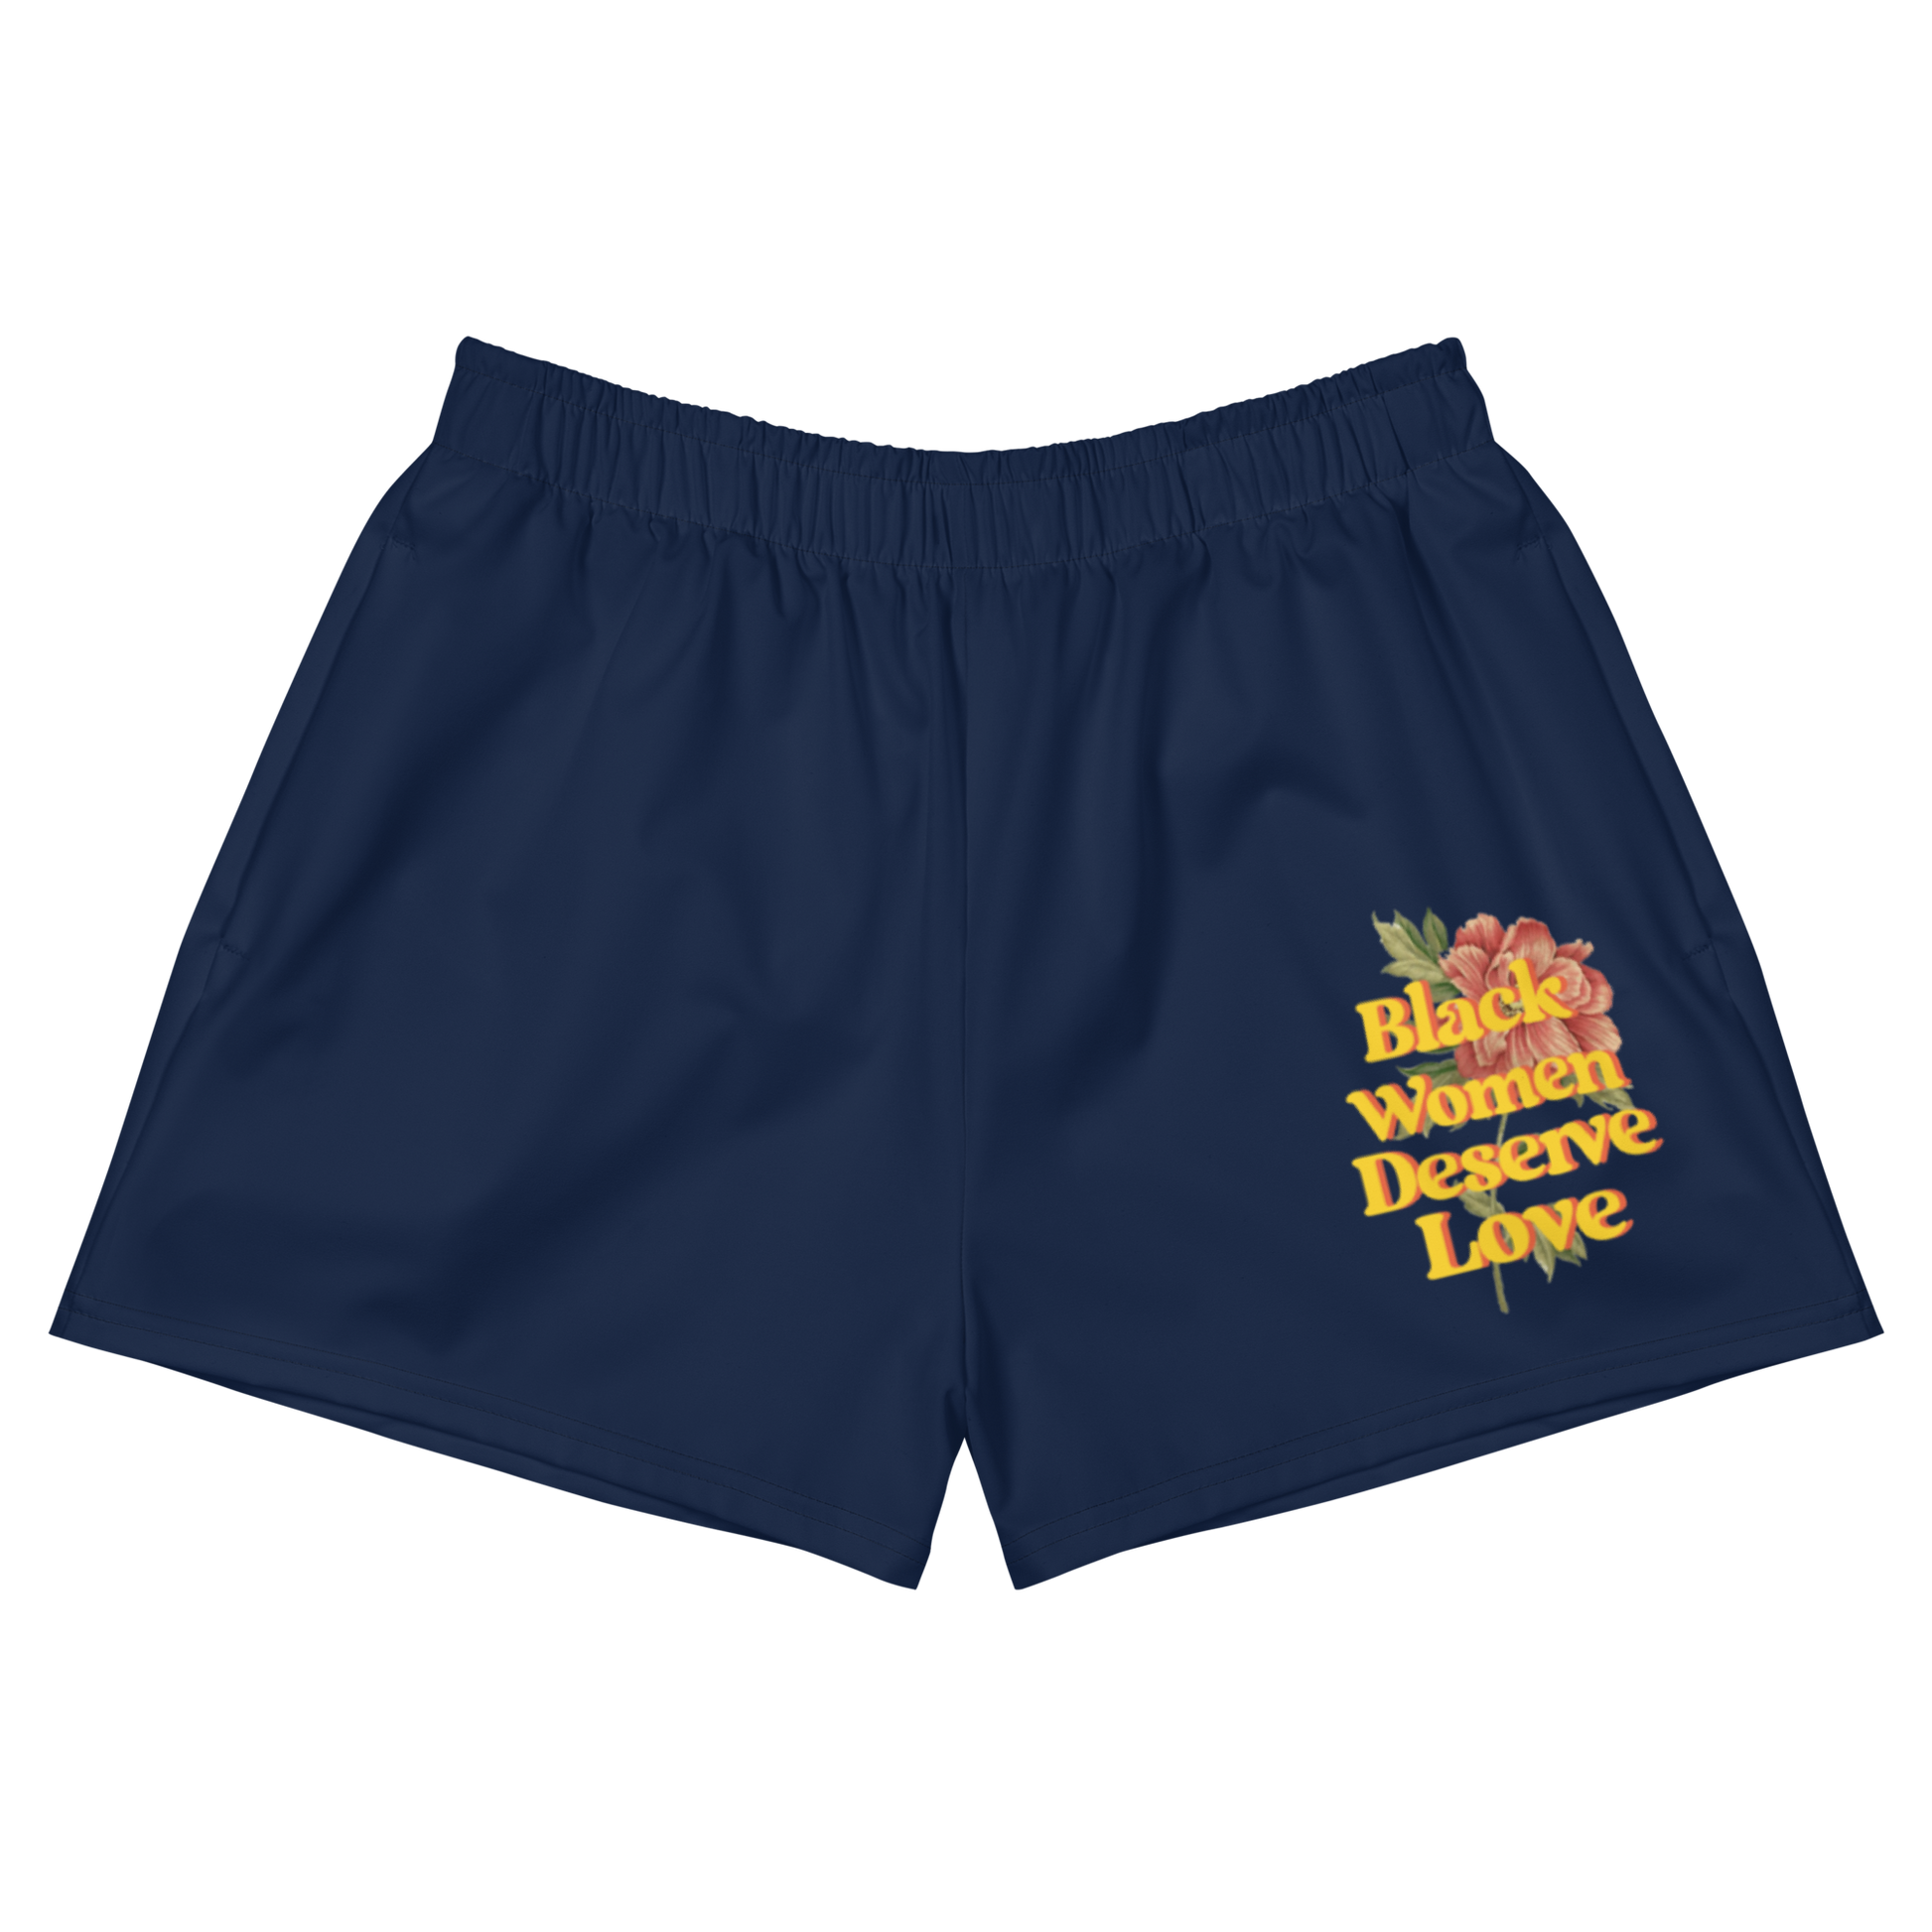 Black Women Deserve Love Women's Athletic Shorts – Aggravated Youth